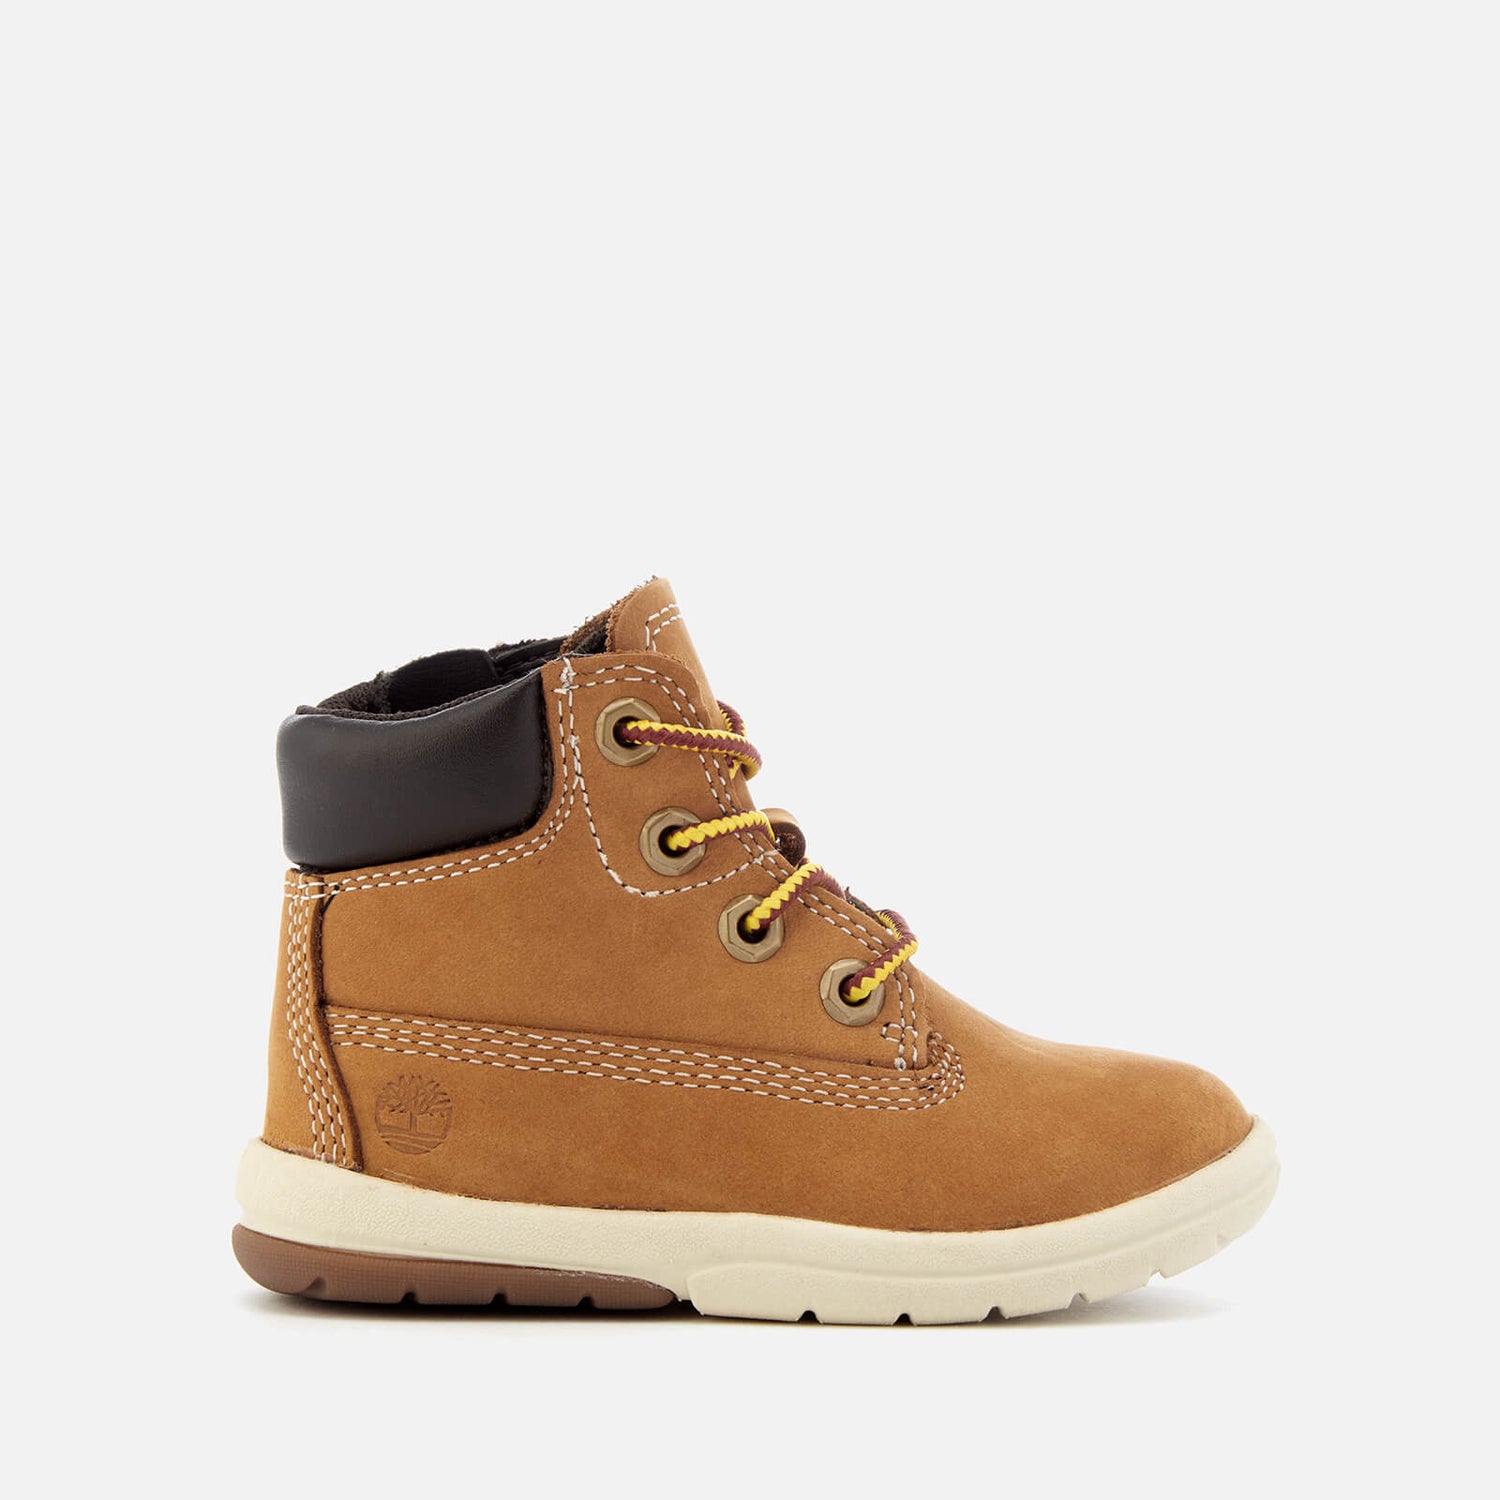 Timberland Toddlers' Toddle Tracks 6 Inch Boots - Wheat | TheHut.com